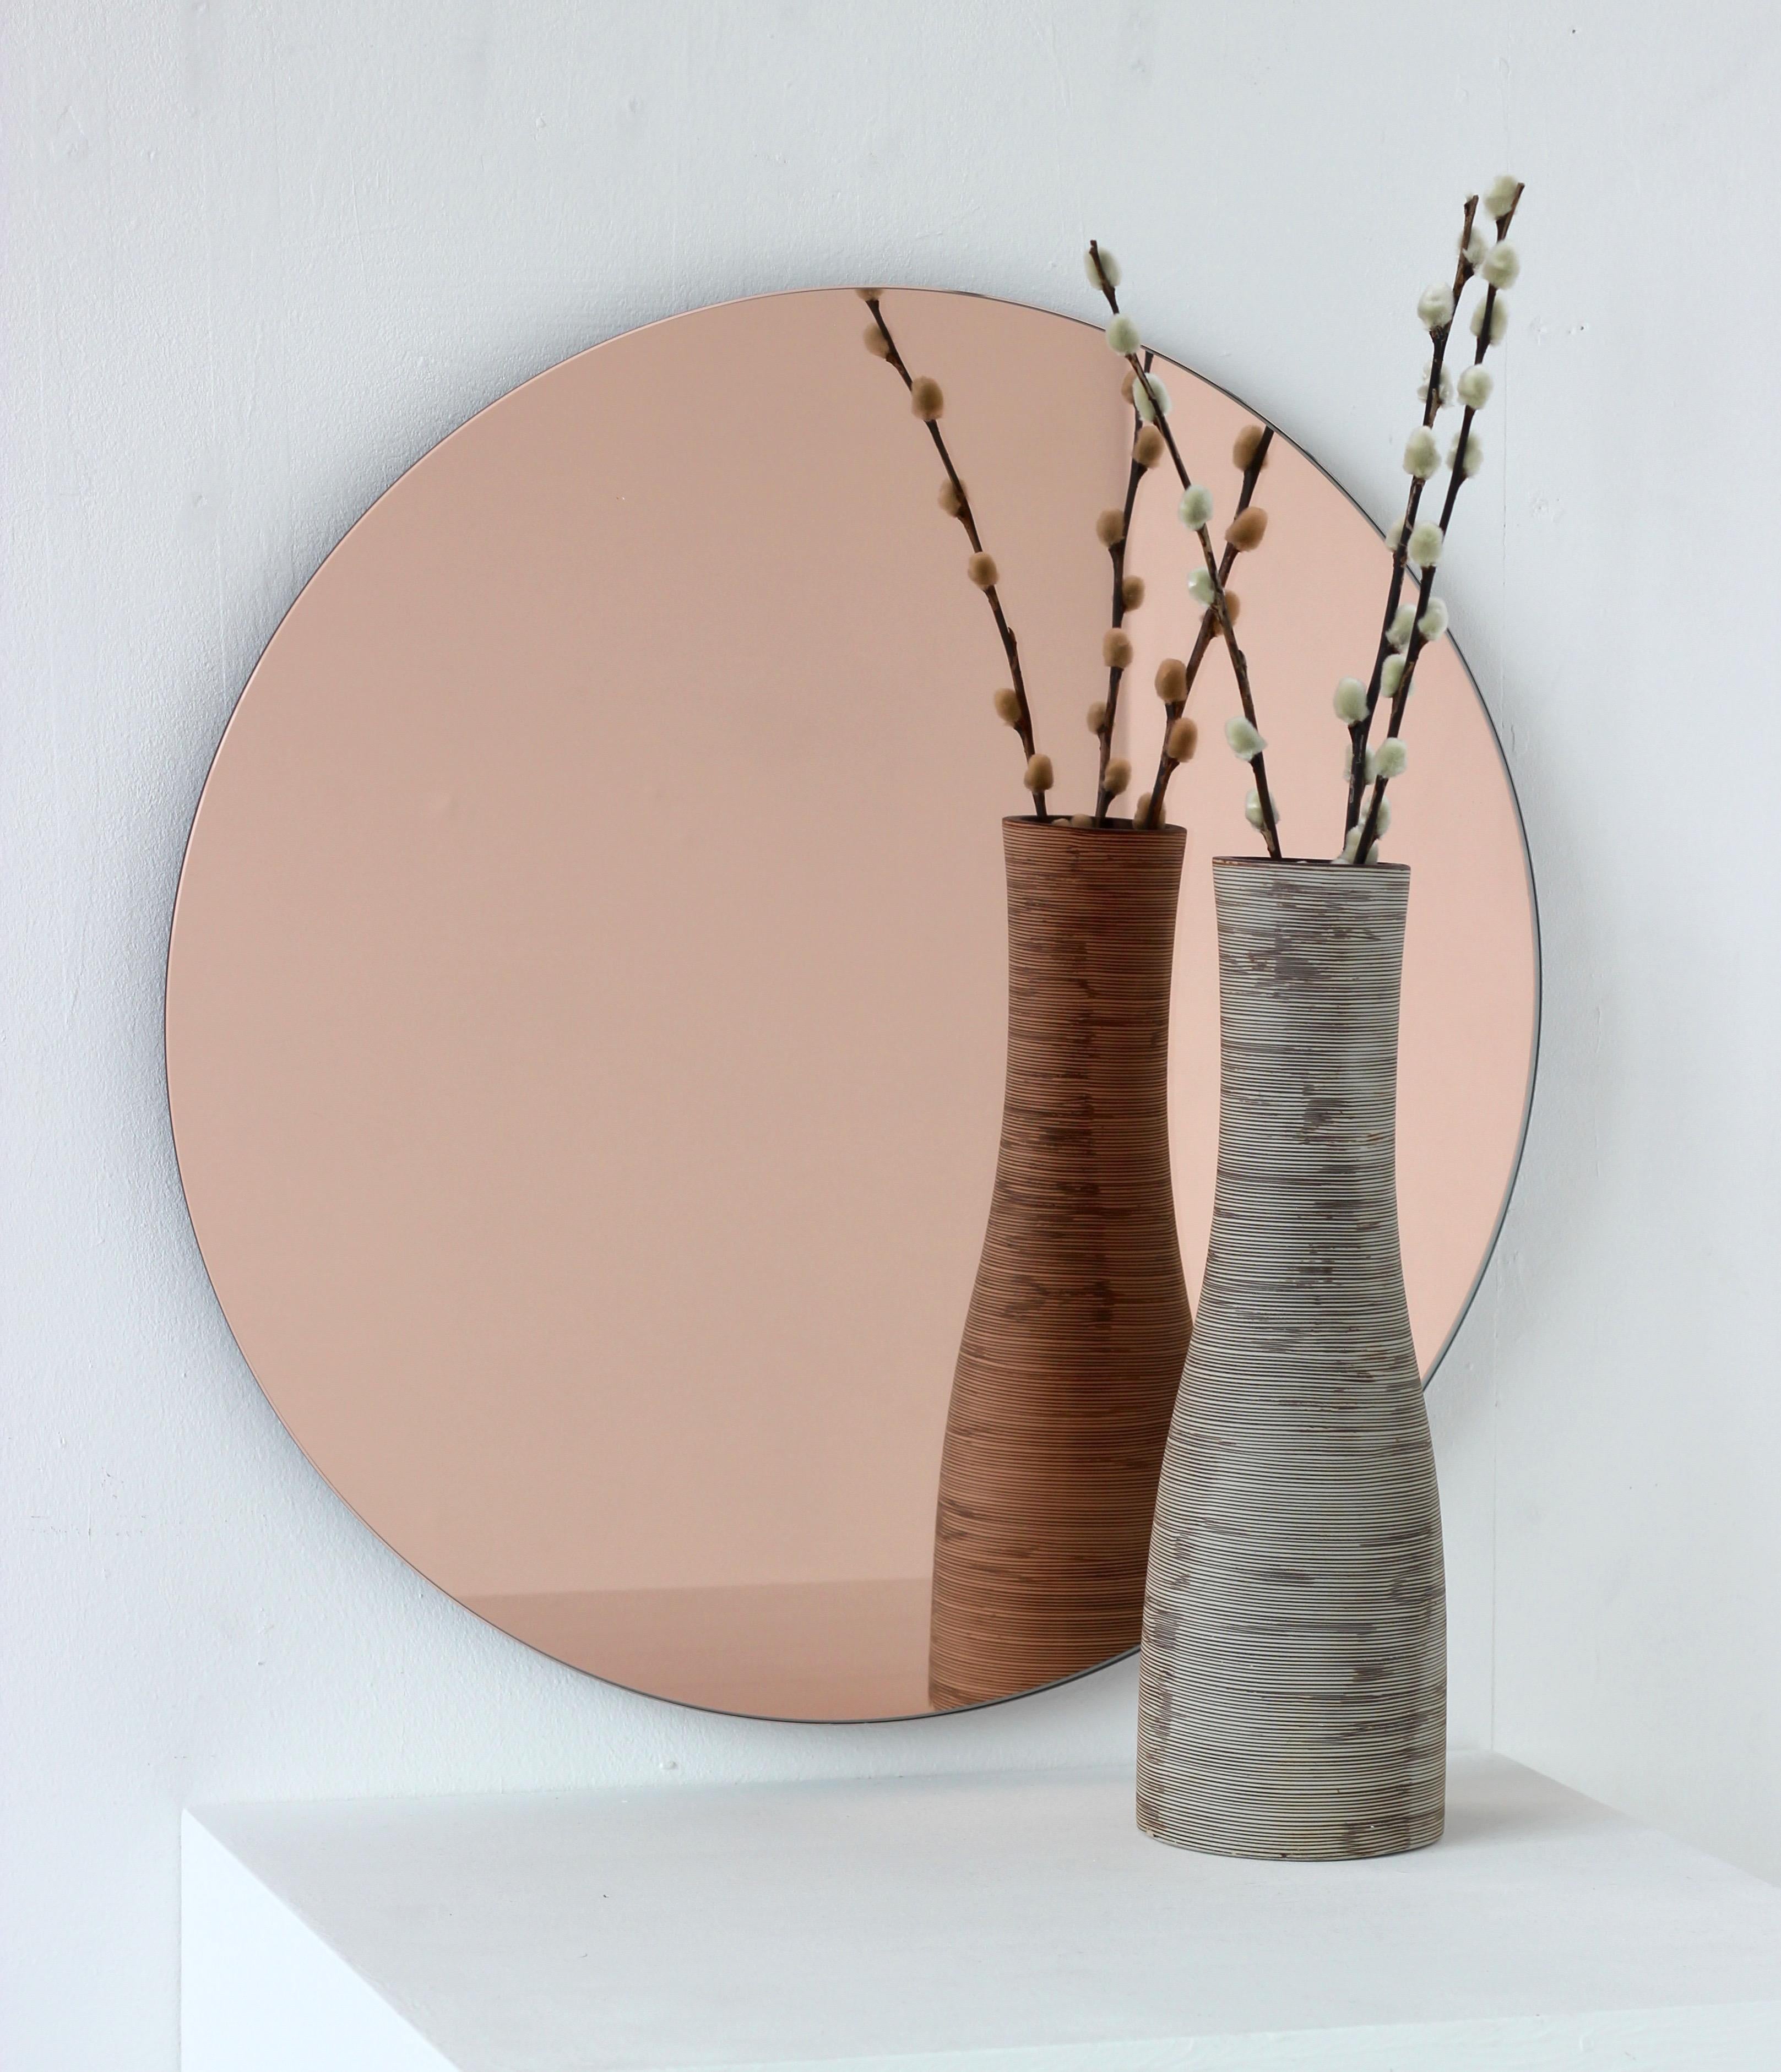 Organic Modern Orbis Rose / Peach Tinted Round Contemporary Frameless Mirror, Large For Sale